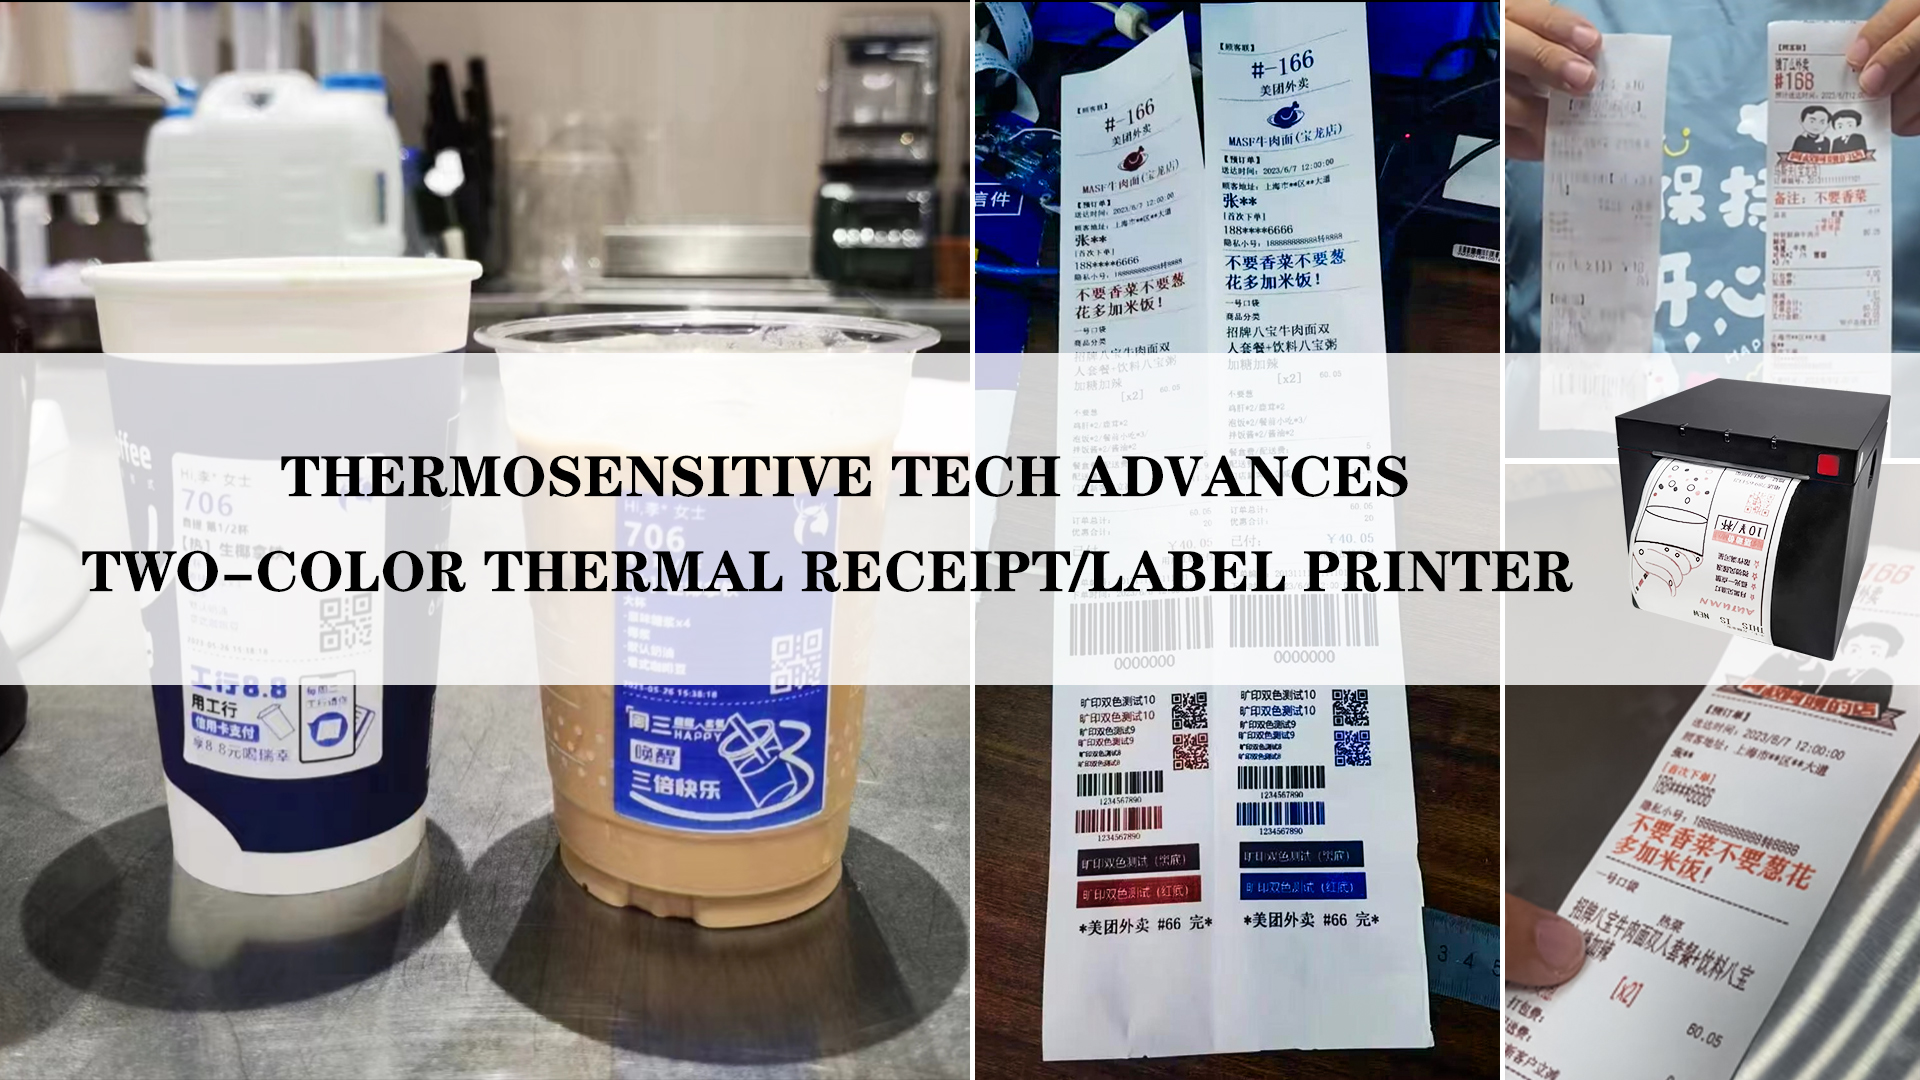 Development of Thermal Ticket Printing Technology - MS-MD80I Desktop Dual-color Thermal Ticket Label Printer